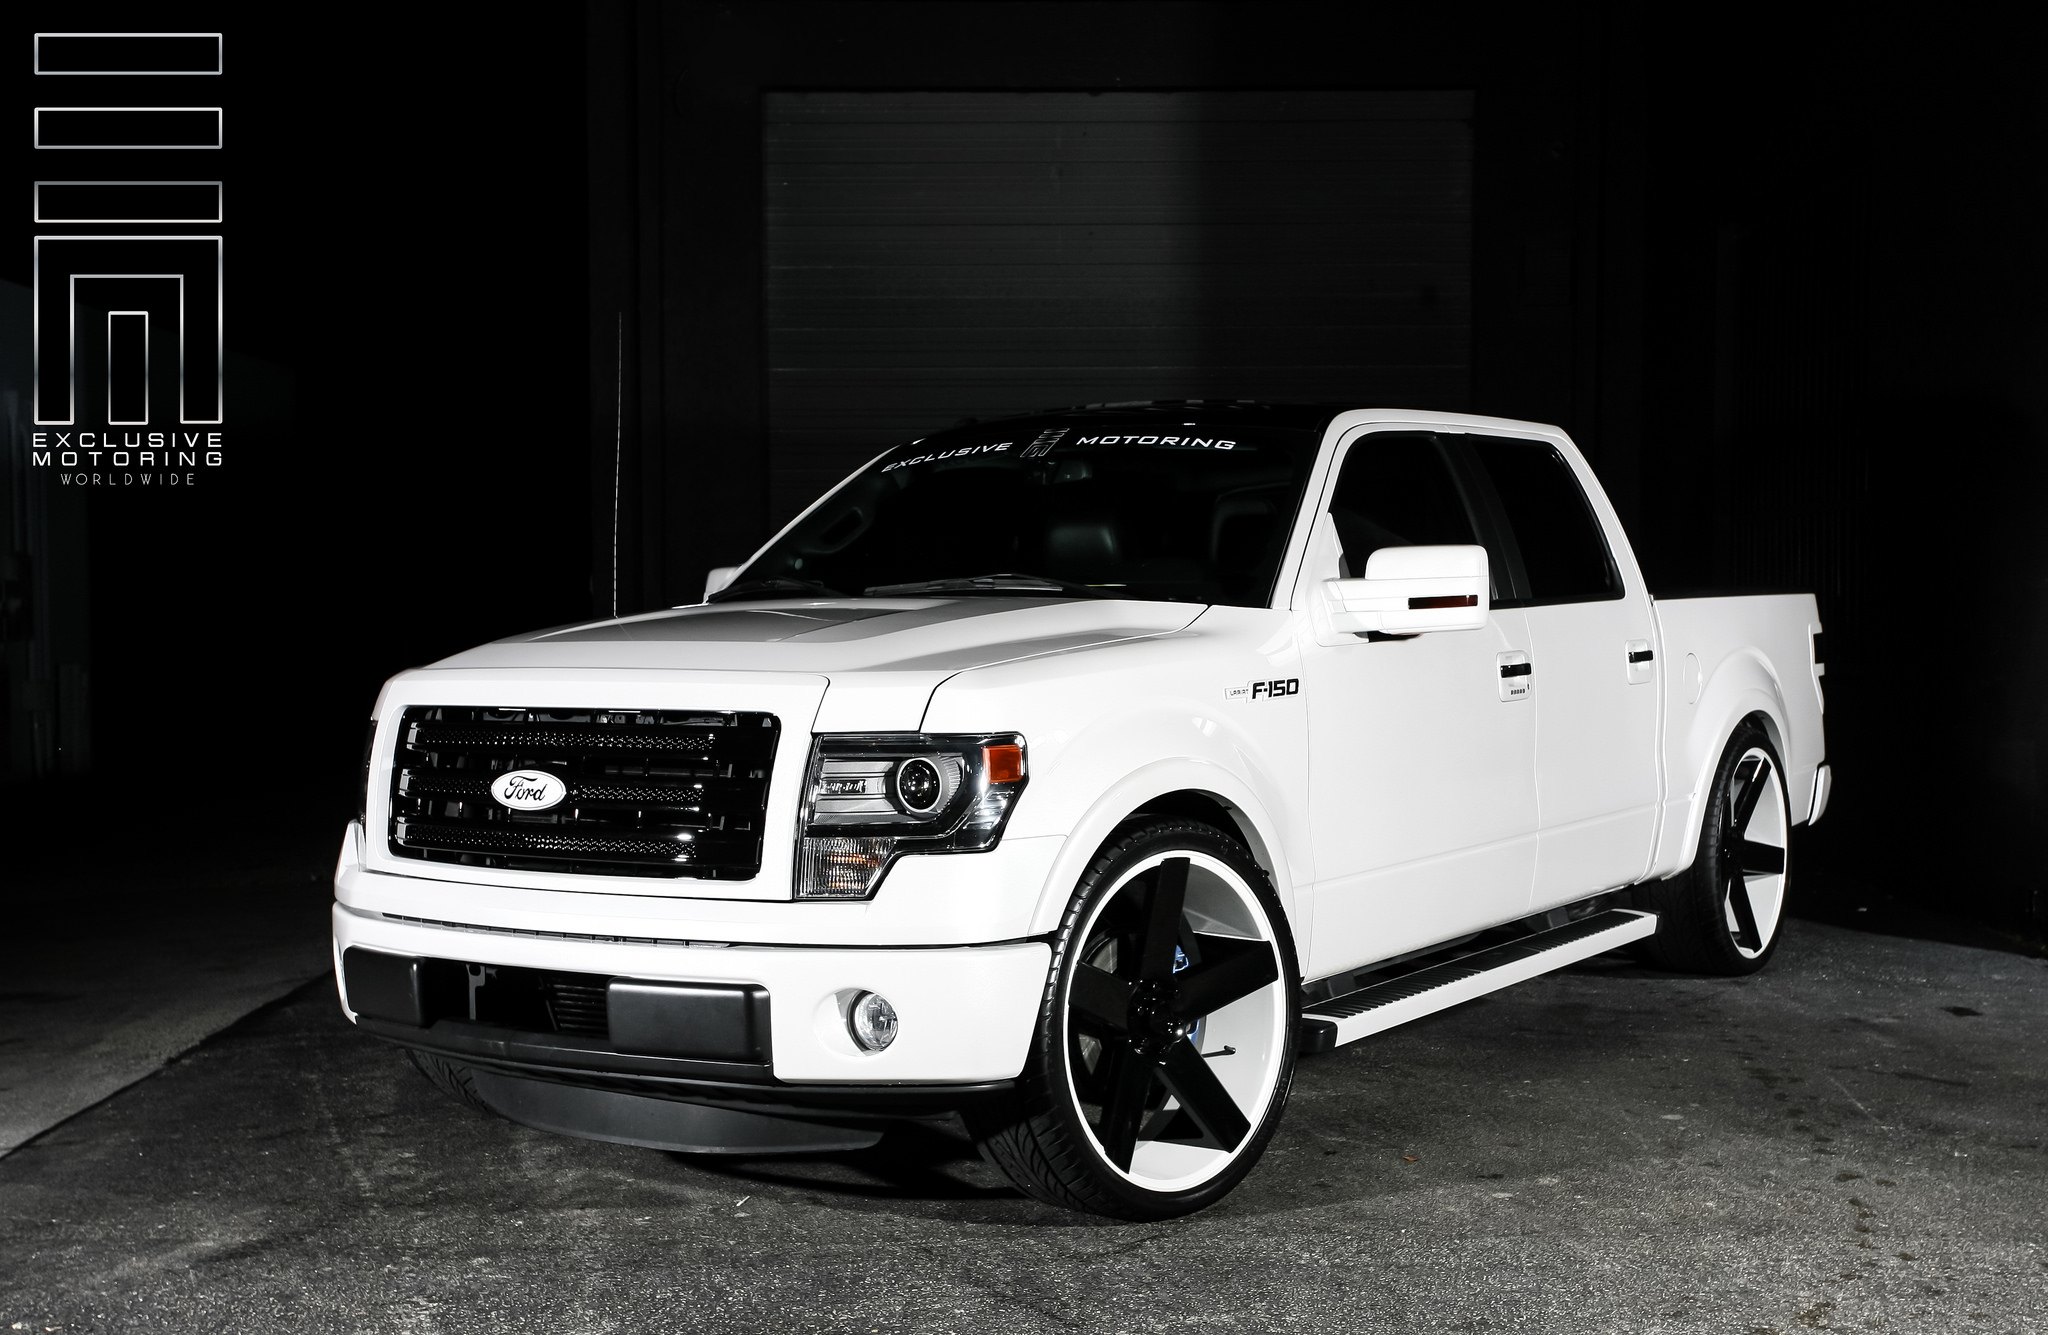 Super White Ford F150 on Black Forgiato Wheels - Photo by Exclusive Motoring